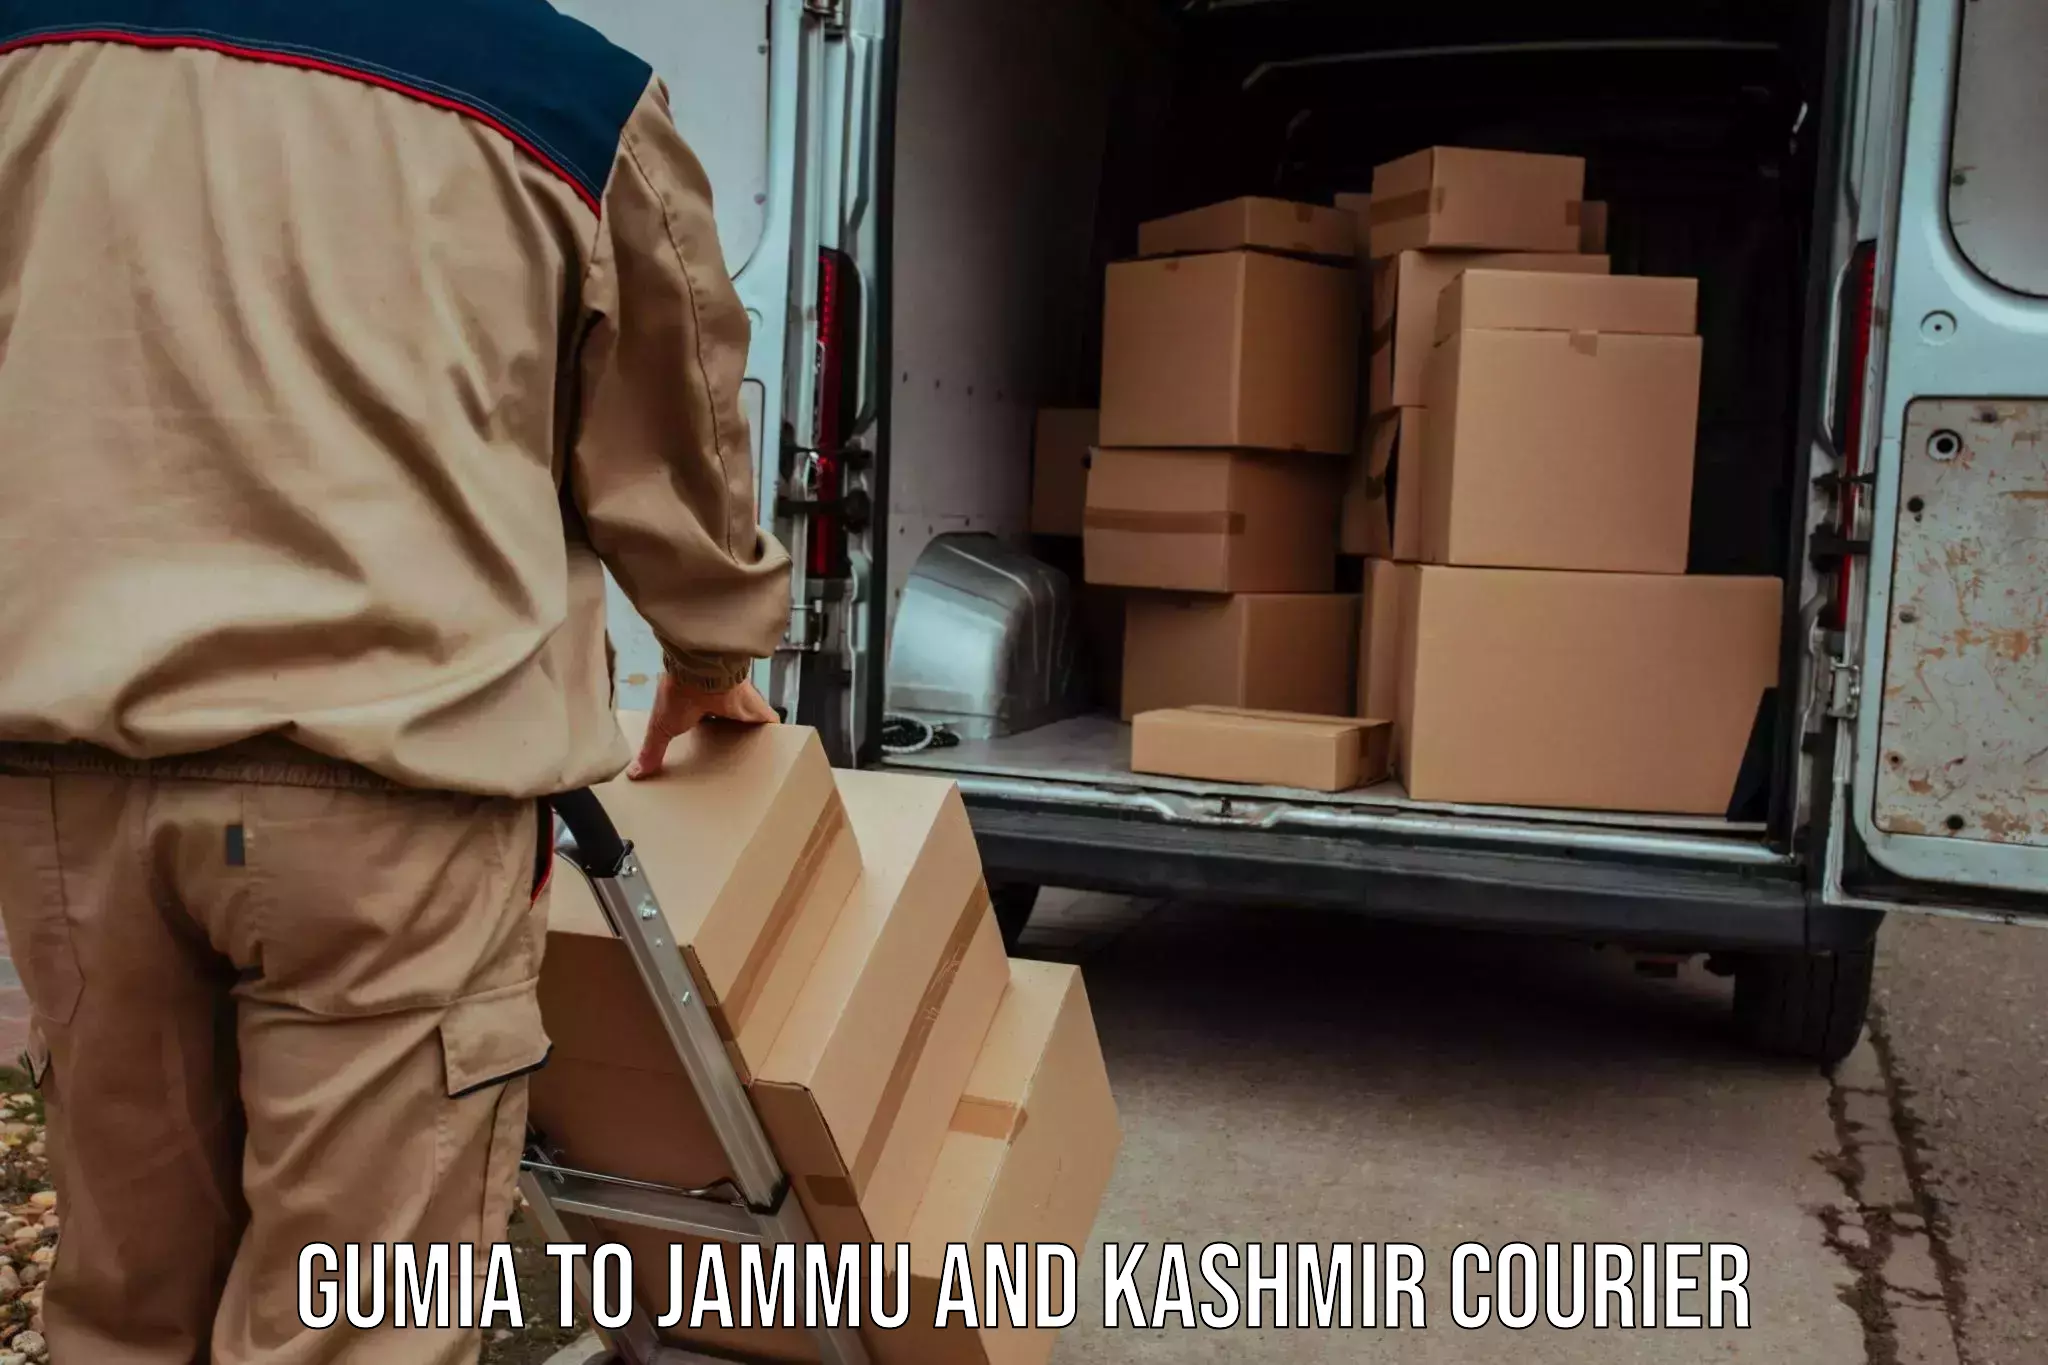 Reliable package handling Gumia to Jammu and Kashmir